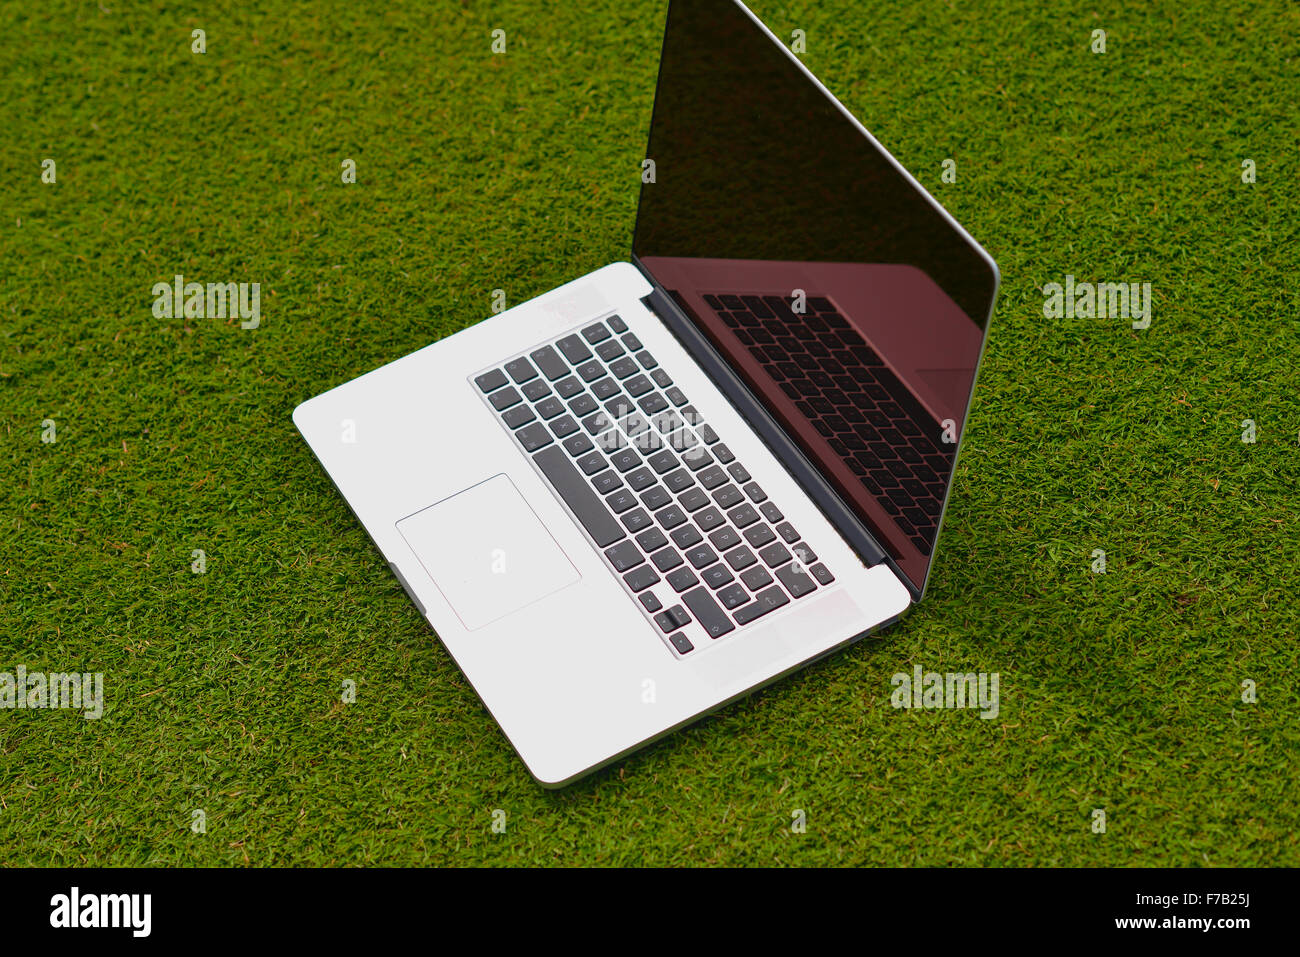 laptop comuter on grass, freedom communication concetp and education and study Stock Photo